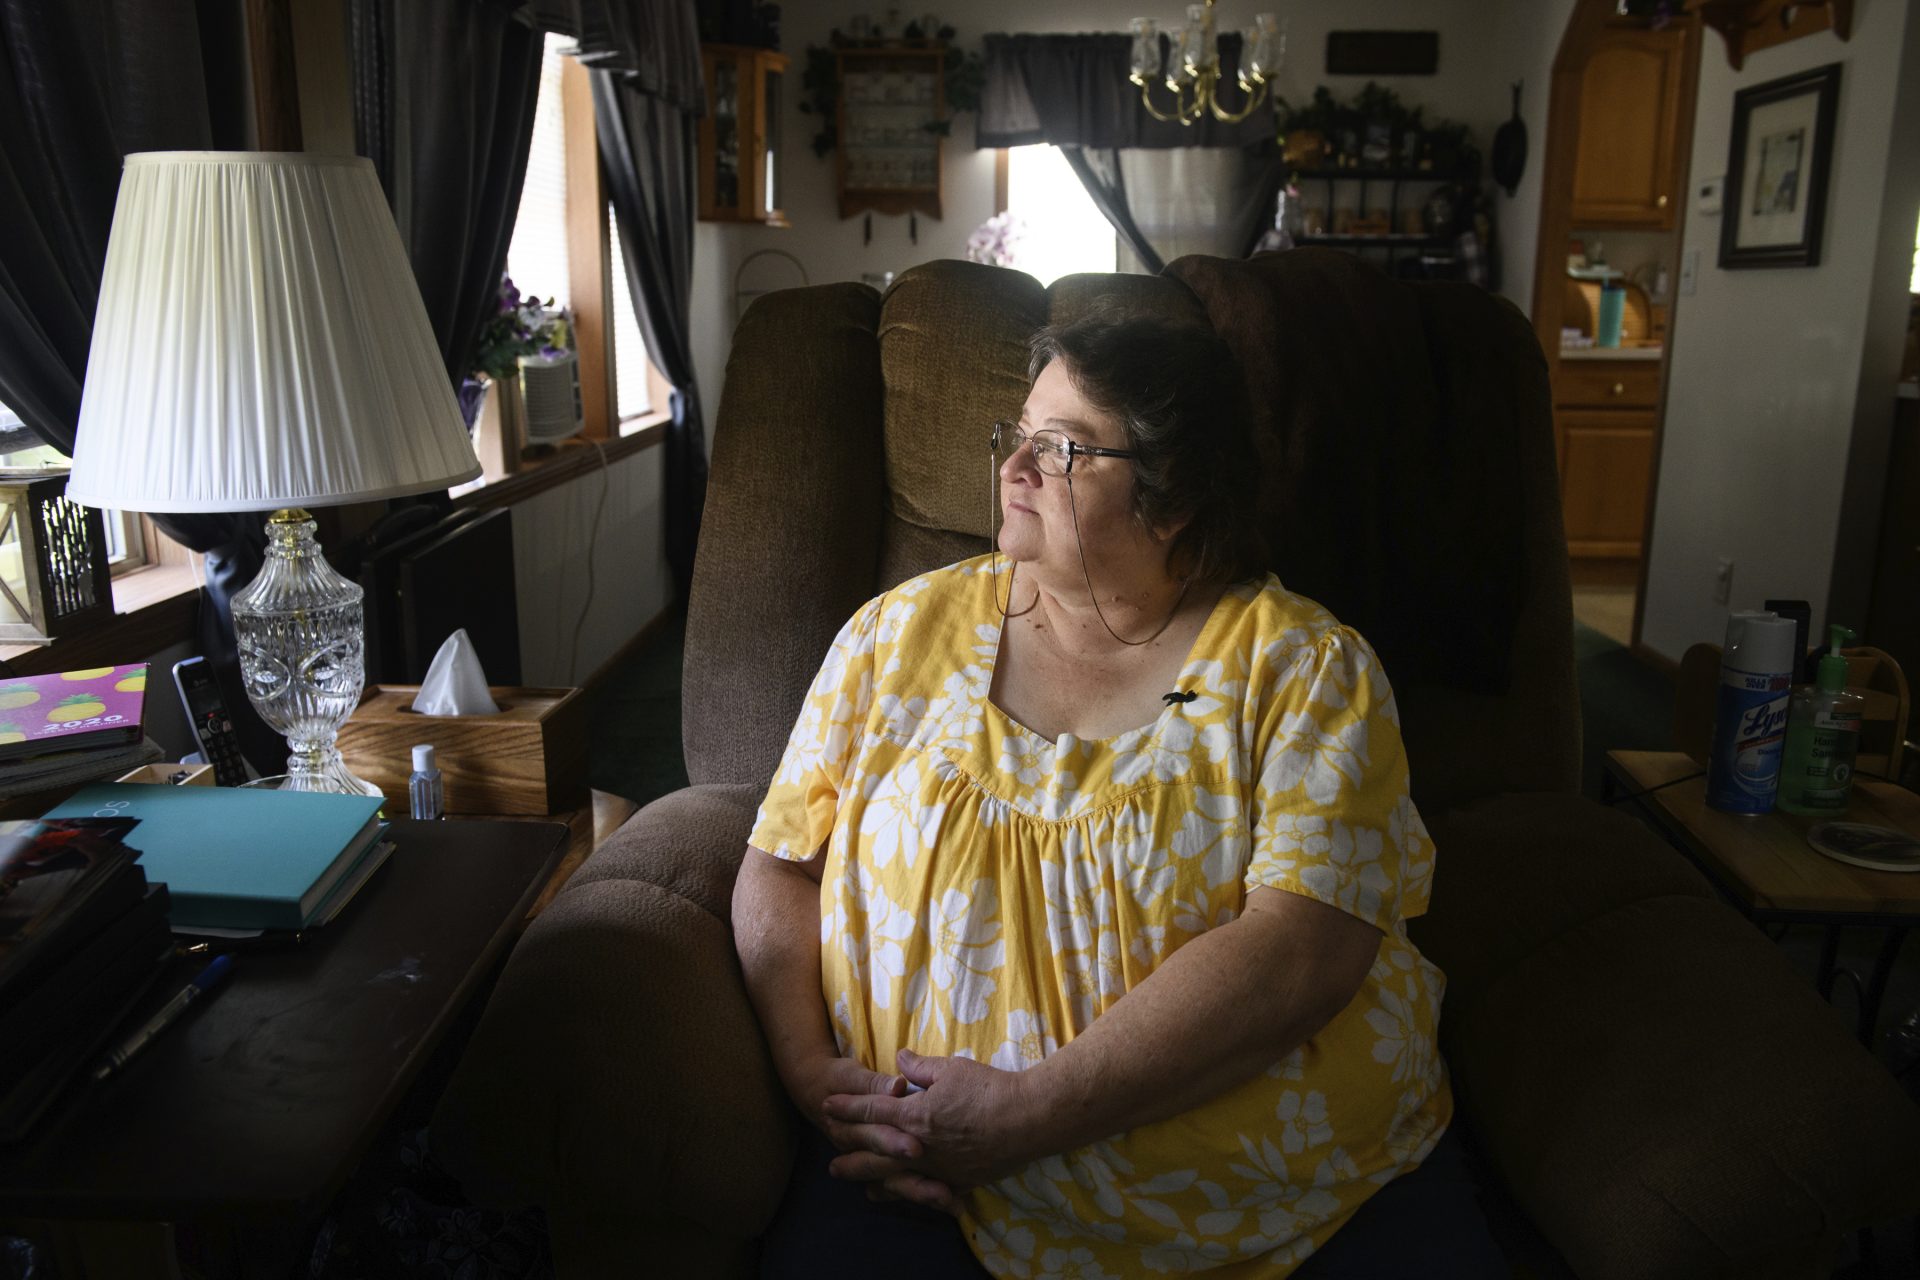 Doris Kelley, 57, sits in her home on Monday, June 29, 2020 in Ruffs Dale, Pa. Kelley was one of the first patients in a UPMC trial for COVID-19.